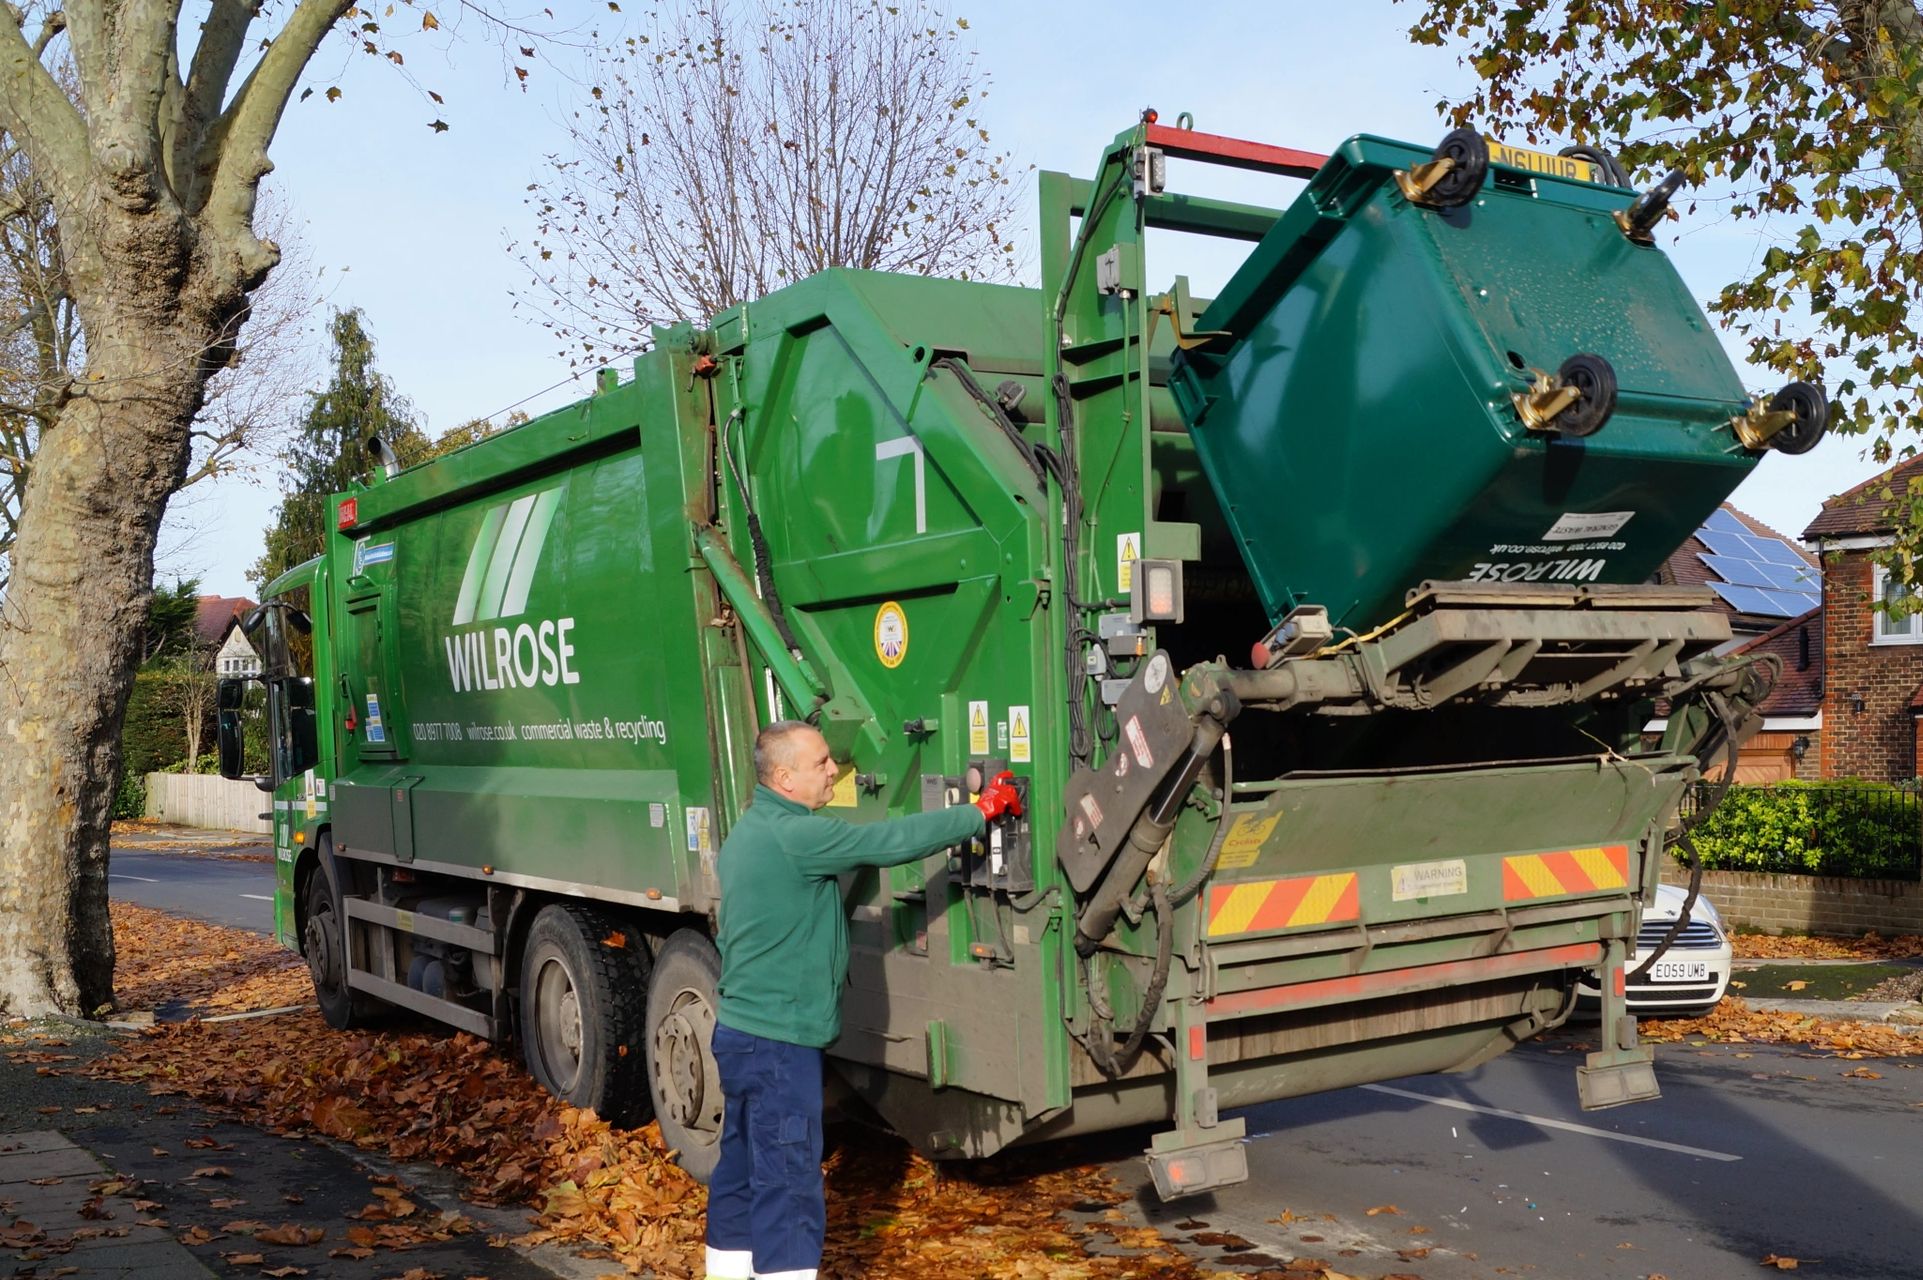 Wilrose commercial waste dustcart tipping a wheelie bin and driver